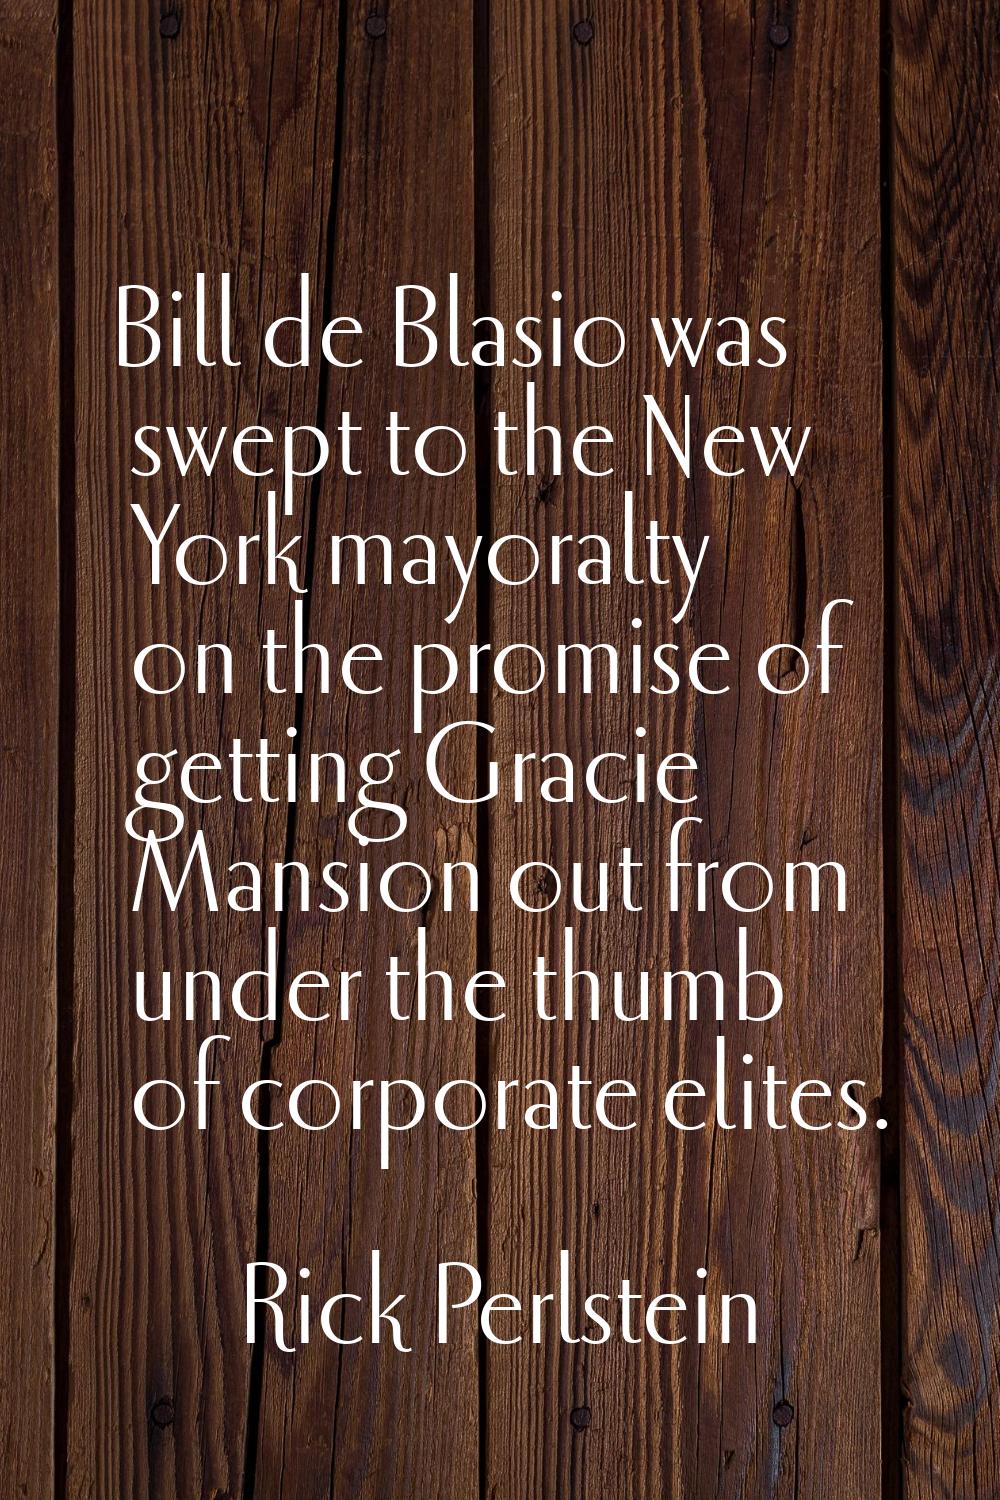 Bill de Blasio was swept to the New York mayoralty on the promise of getting Gracie Mansion out fro